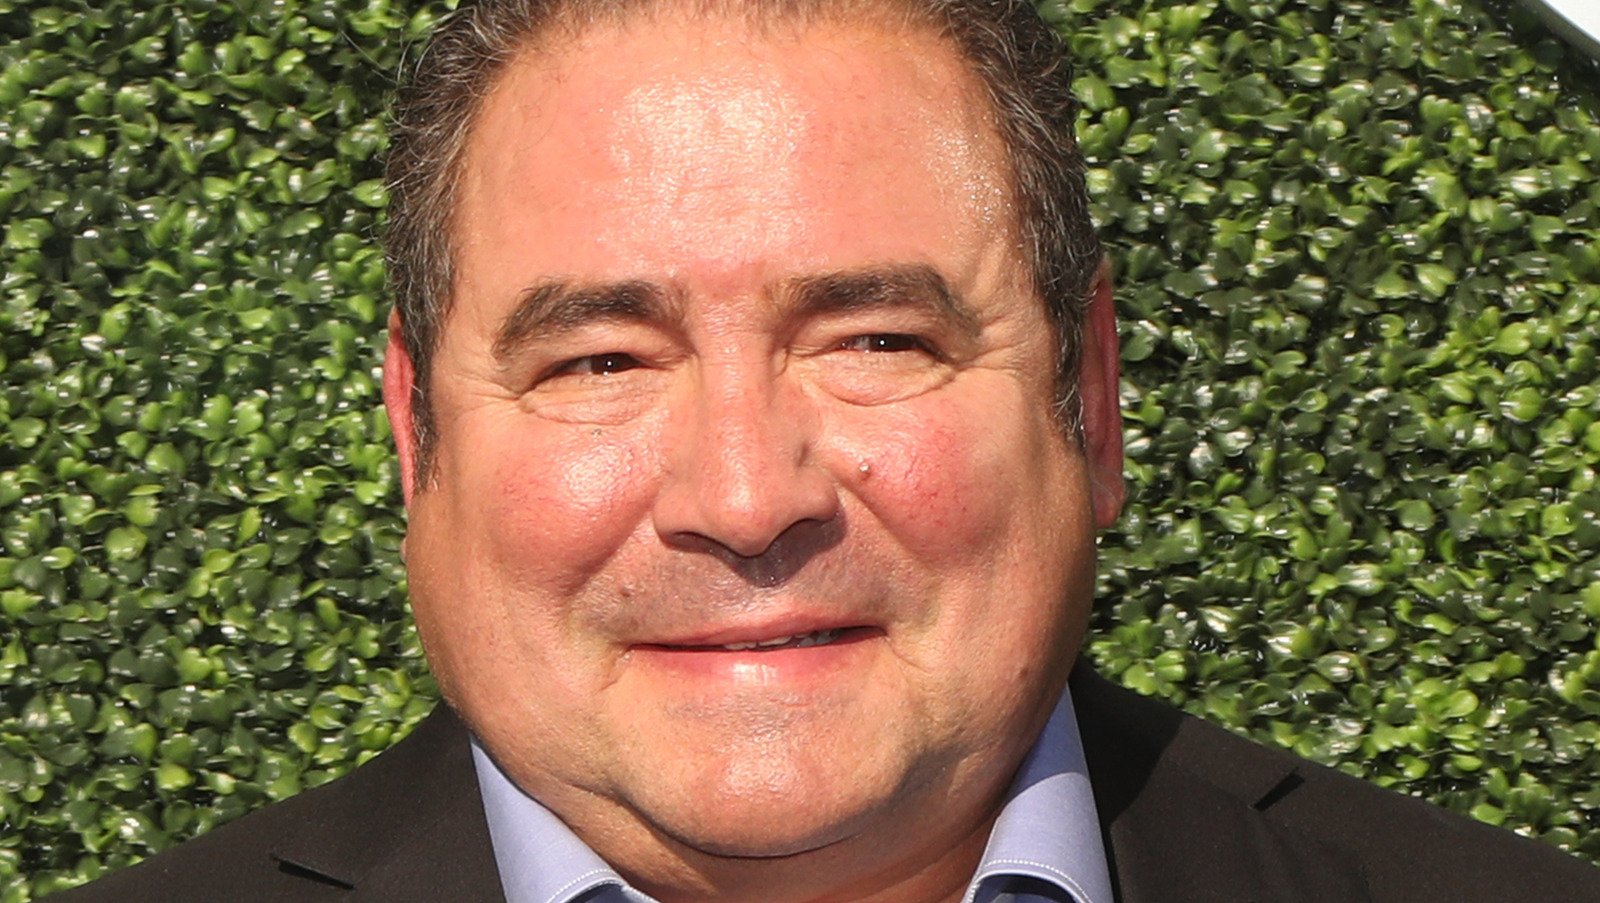 This Is How Emeril Lagasse Built His Empire - Mashed